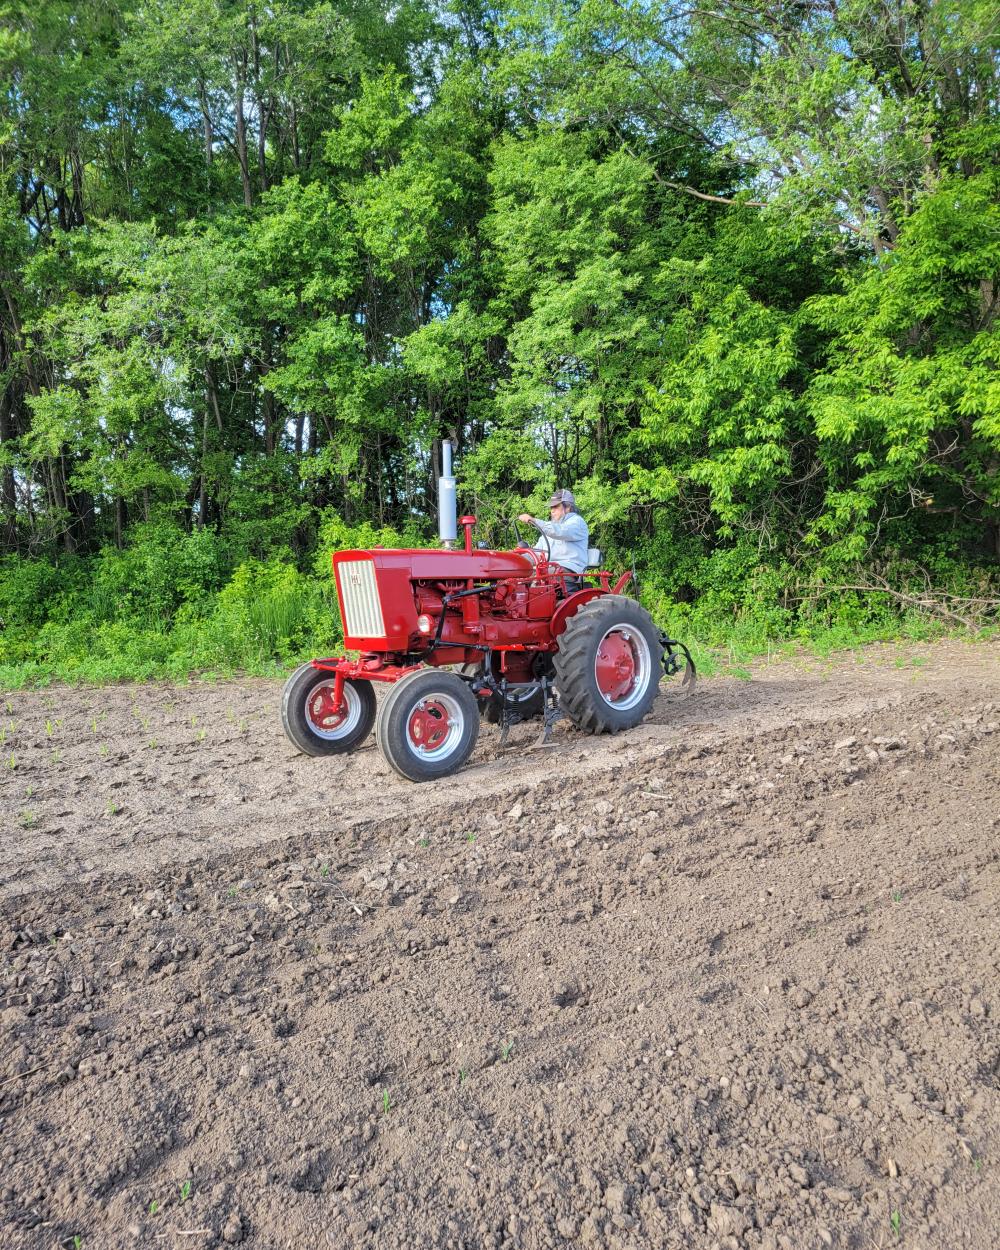 Farmer on a tractor in the field